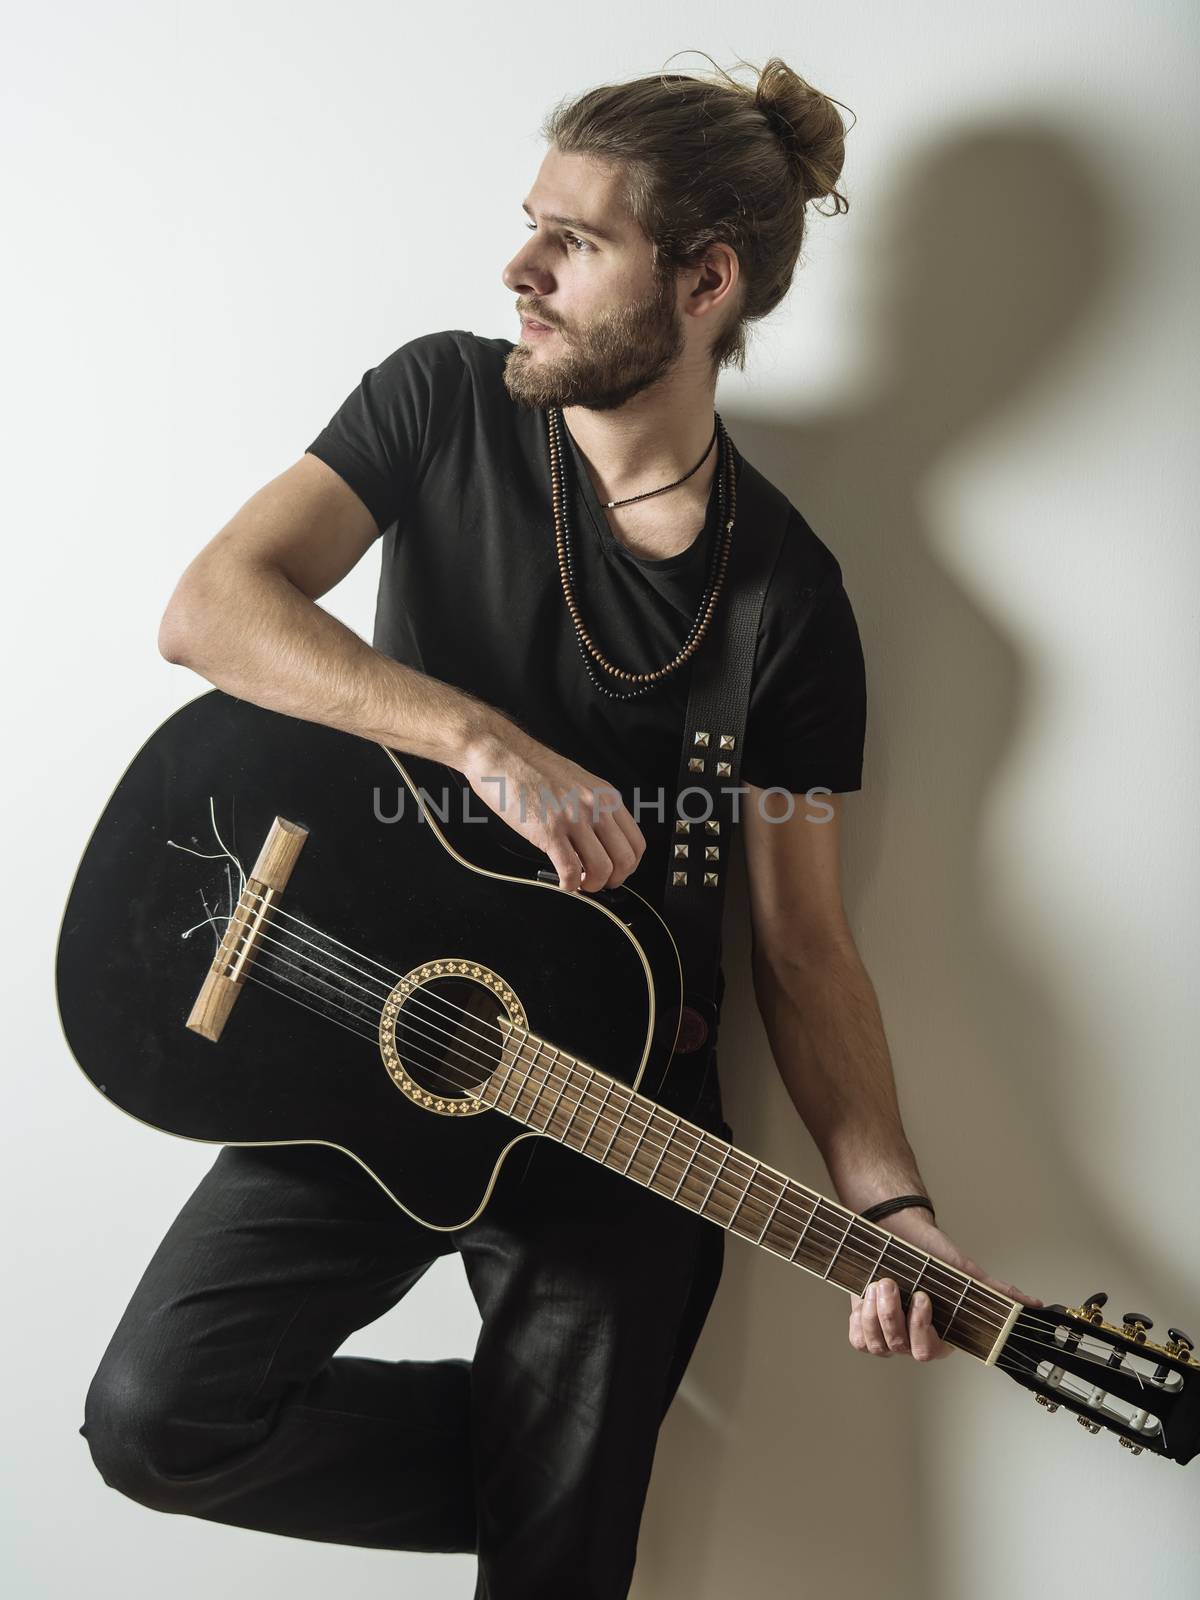 Photo of a young attractive man with long hair and beard leaning against the wall holding an acoustic guitar.
